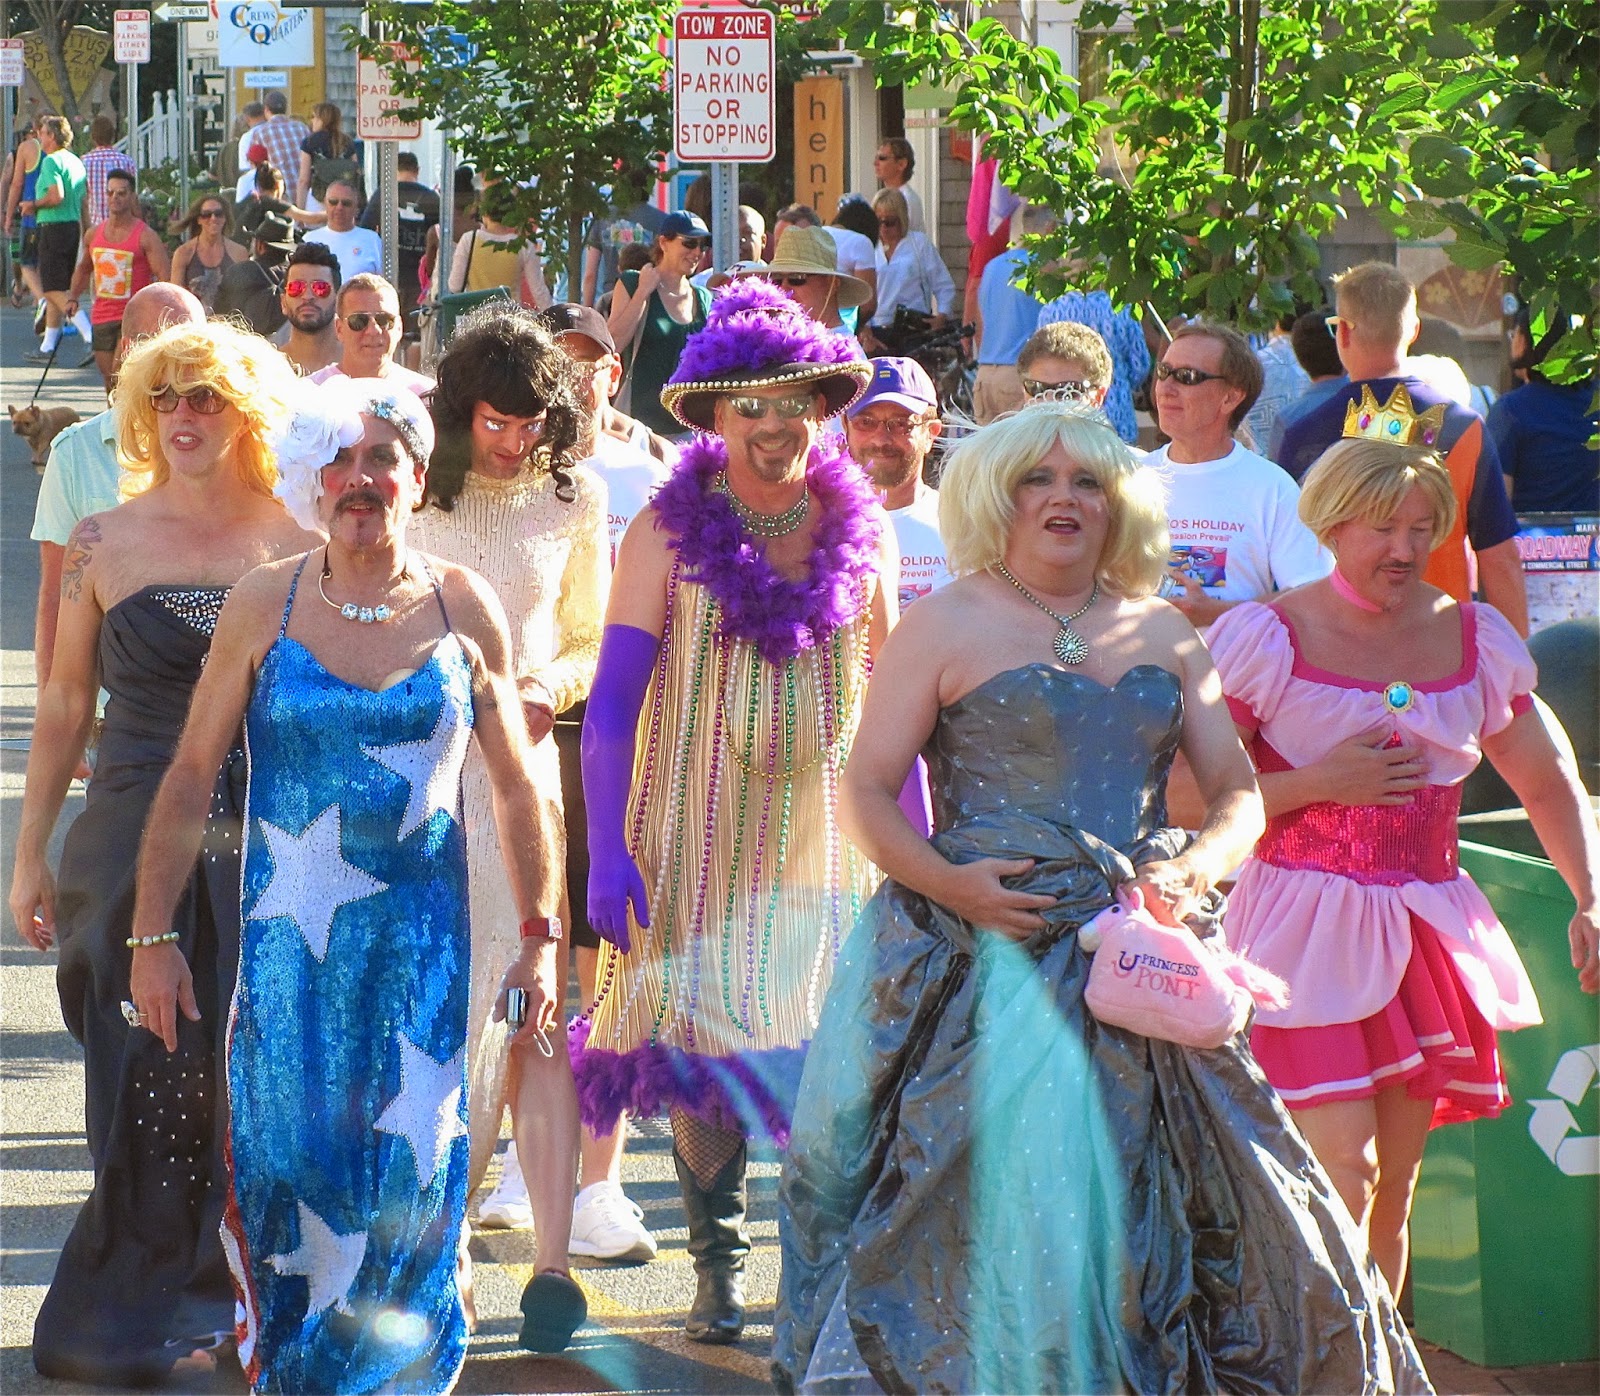 TheYearRounder's Guide to Provincetown: This Year's Carnival Brings ...